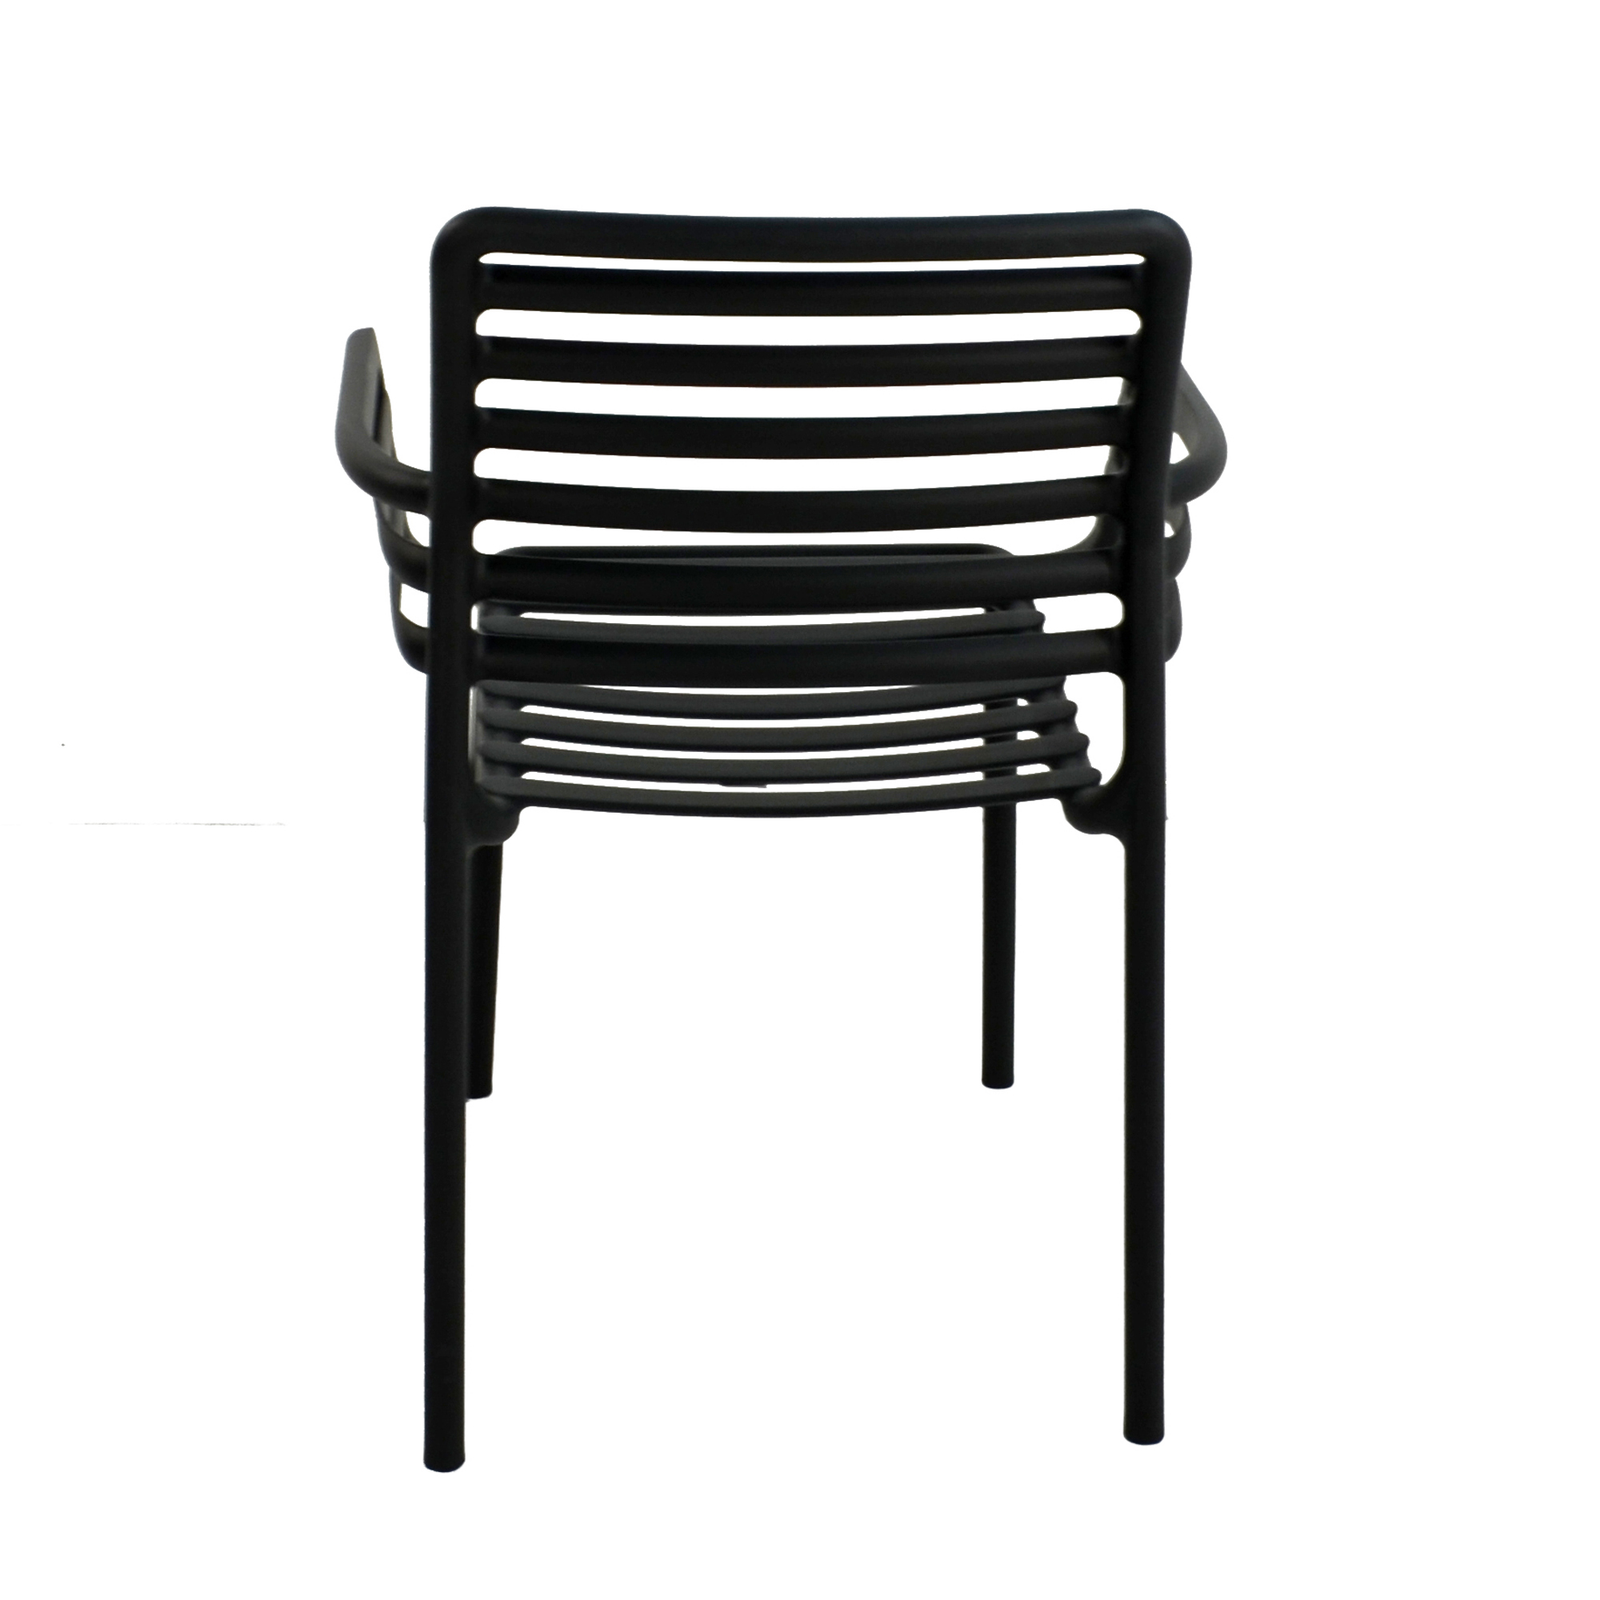 Nardi Doga Garden Chair in Anthracite Grey (Pack of 2) Chairs Nardi   